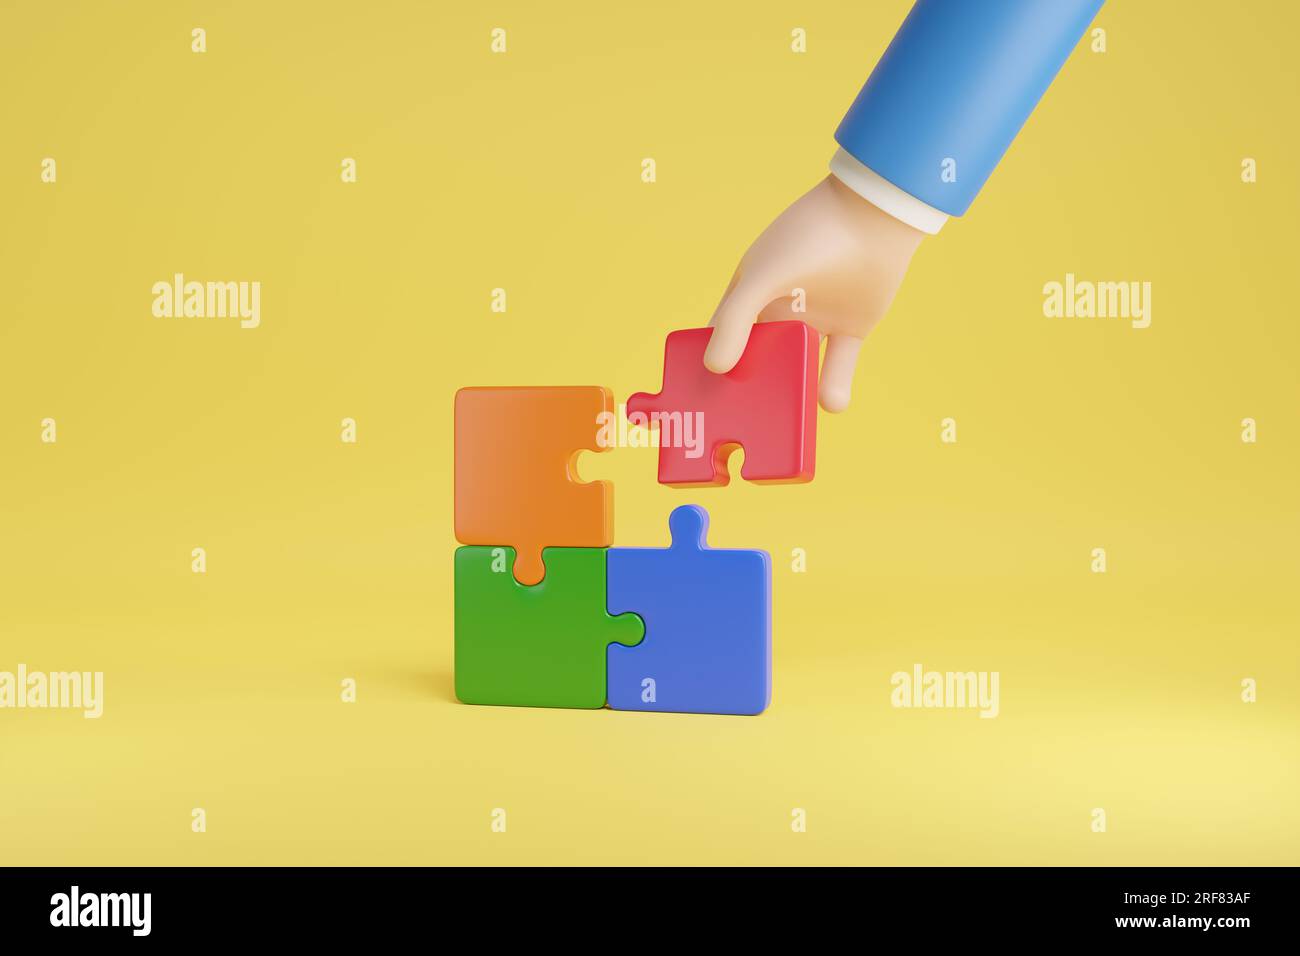 Cartoon hand placing a red puzzle piece isolated on yellow background. 3d illustration. Stock Photo